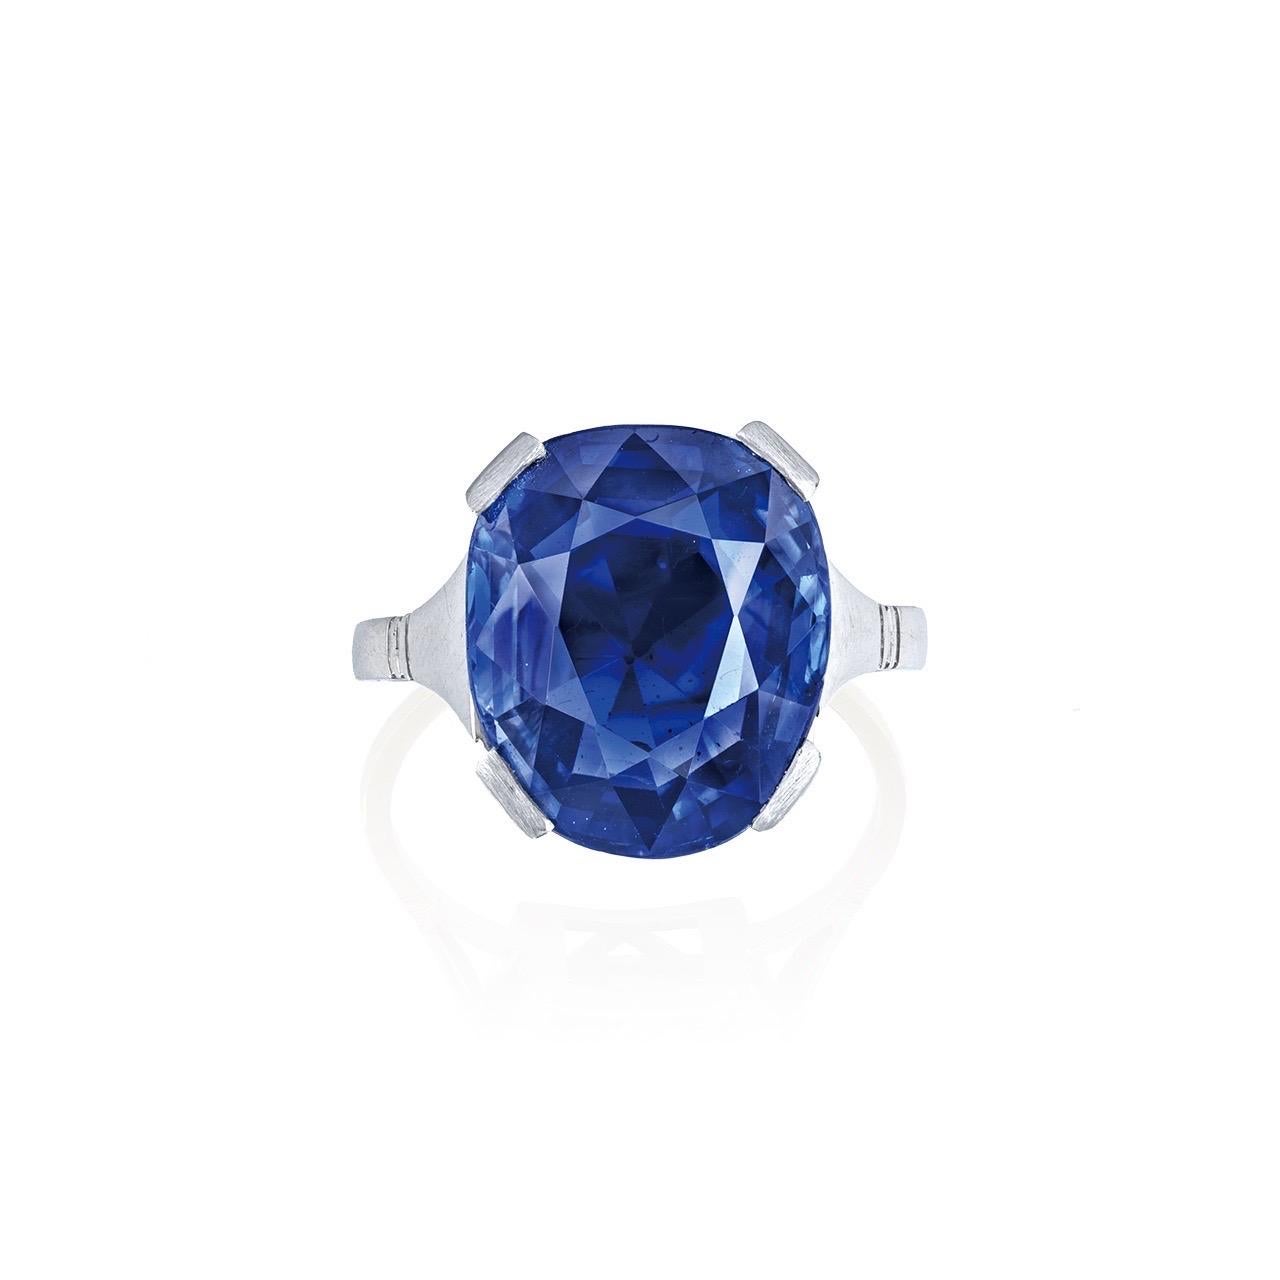 From Emilio Jewelry, a well known and respected wholesaler/dealer located on New York’s iconic Fifth Avenue, 
The focal point is a spectacular 9.90+carat Kashmir Velvet blue Sapphire. 
Please inquire for more images, certificates, details, and any